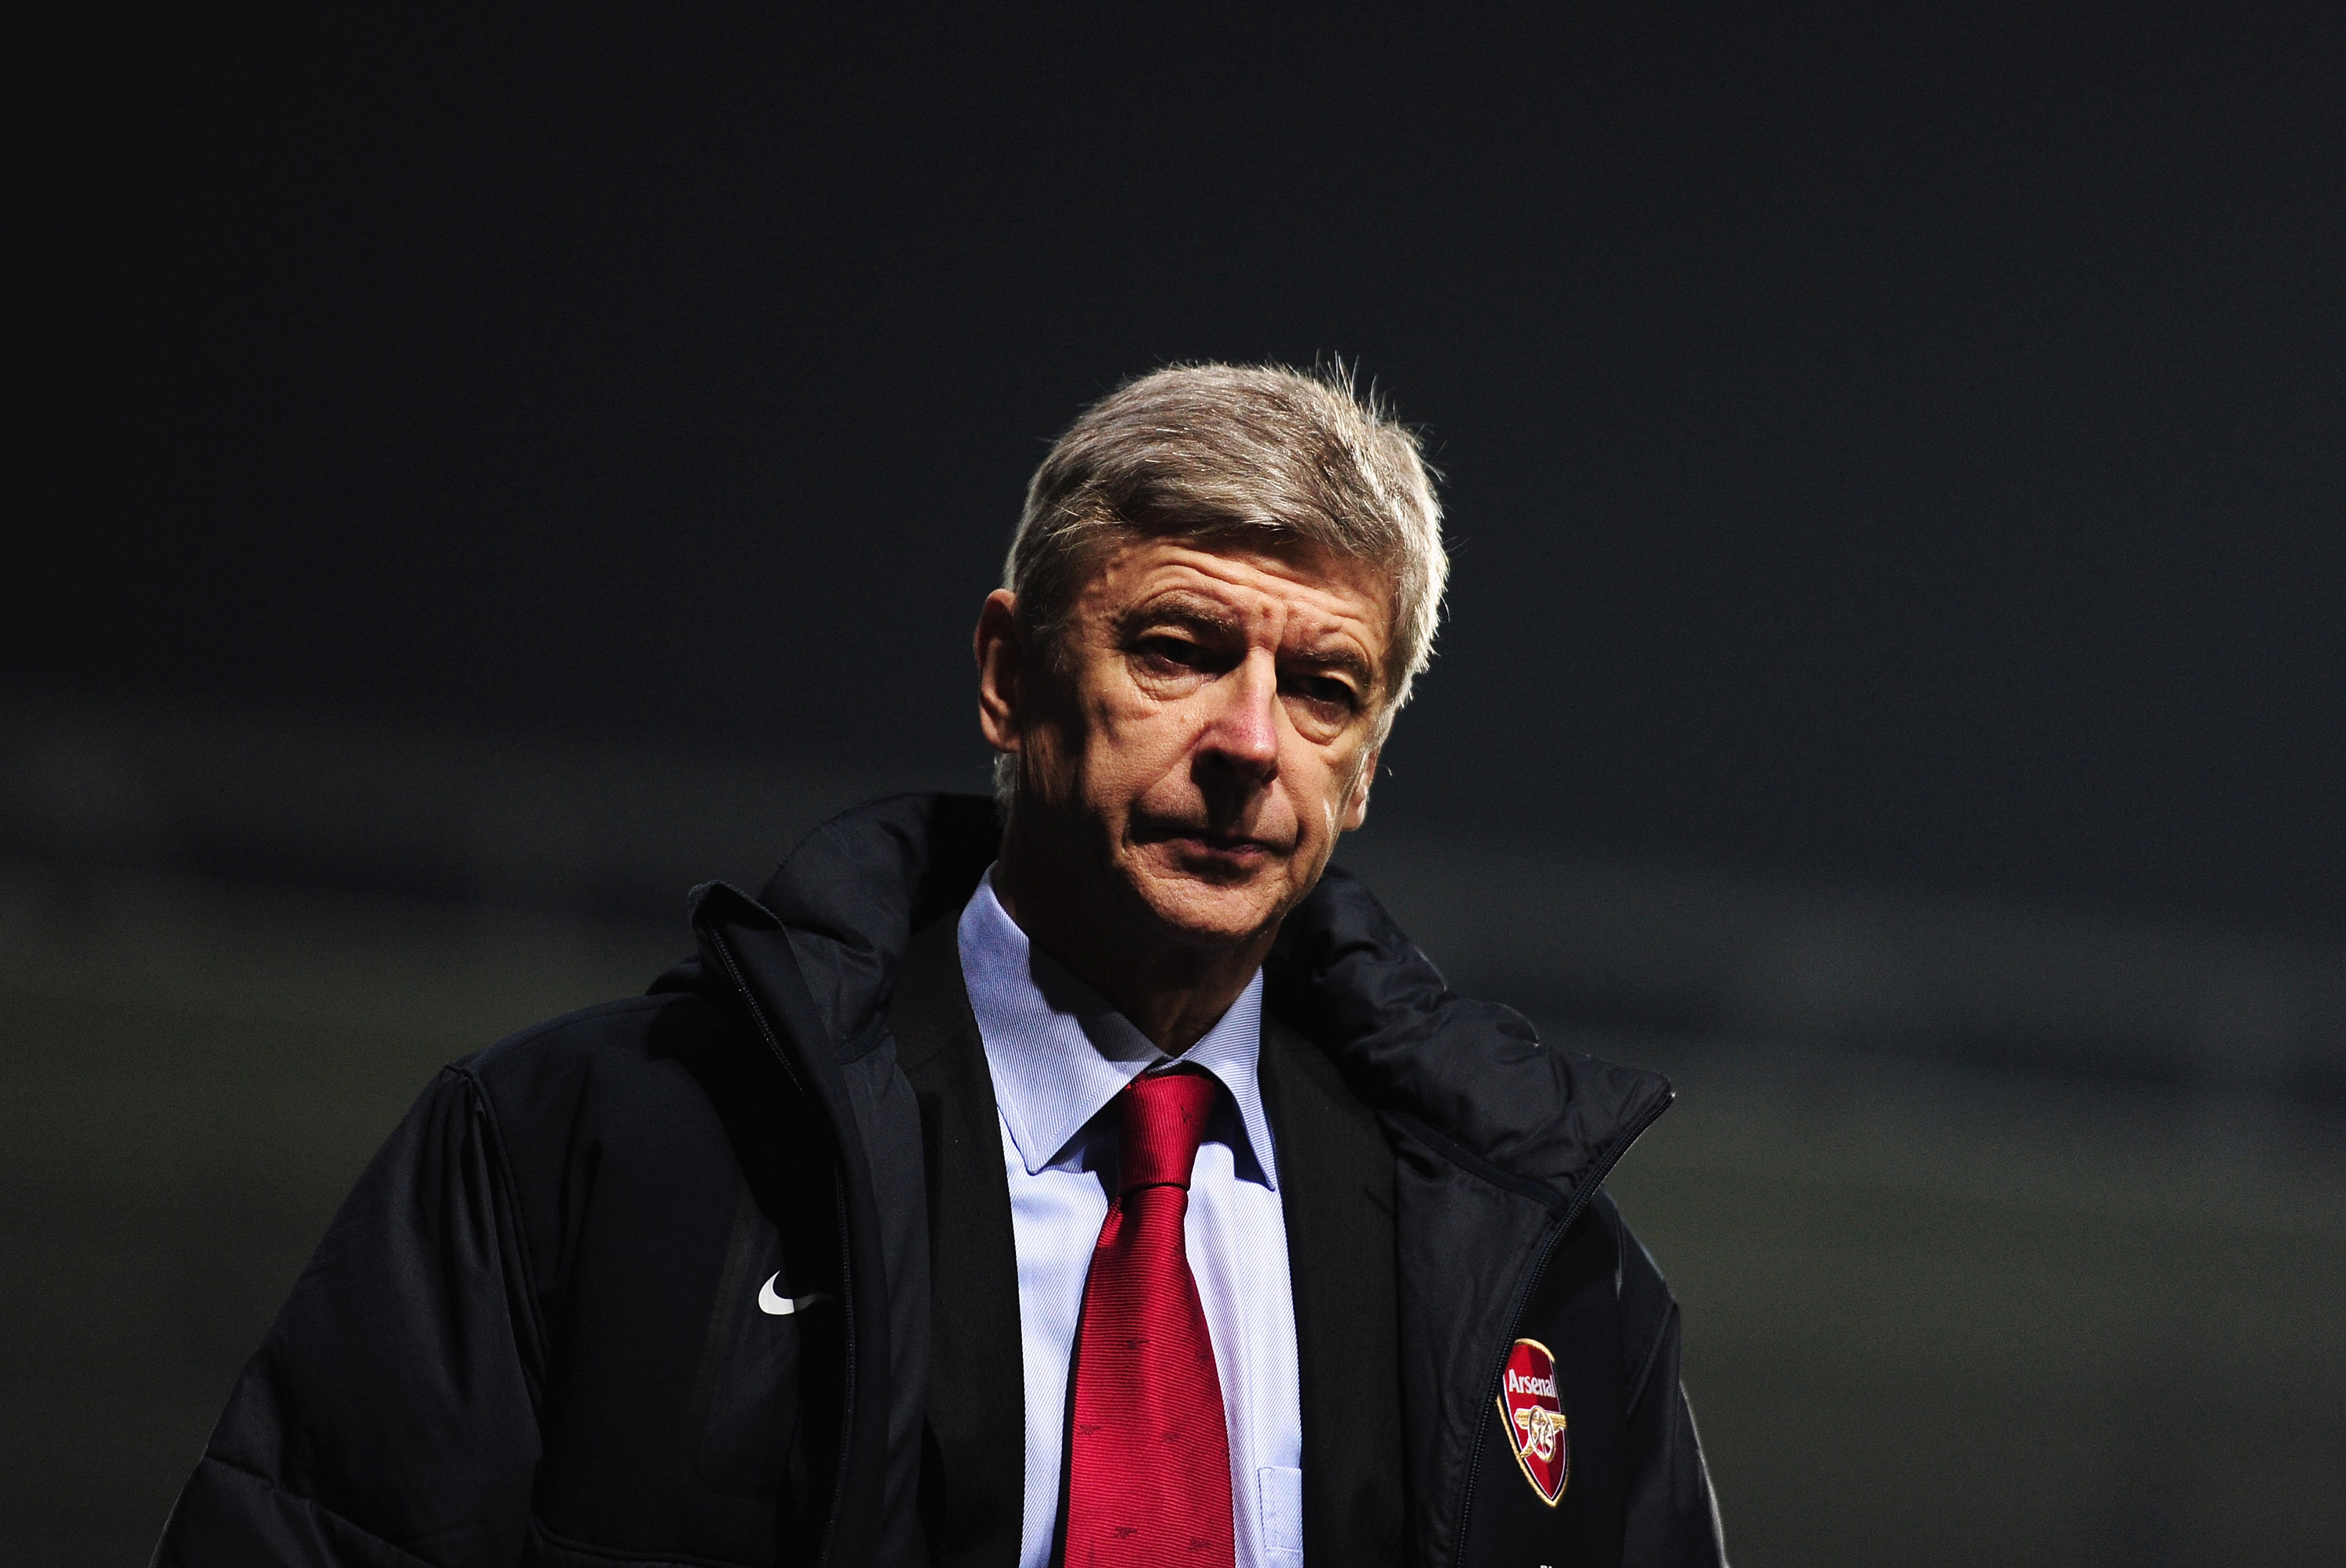 IPSWICH, ENGLAND - JANUARY 12:  Arsene Wenger, Manager of Arsenal walks off at half time during the Carling Cup Semi Final First Leg match between Ipswich Town and Arsenal at Portman Road on January 12, 2011 in Ipswich, England.  (Photo by Jamie McDonald/